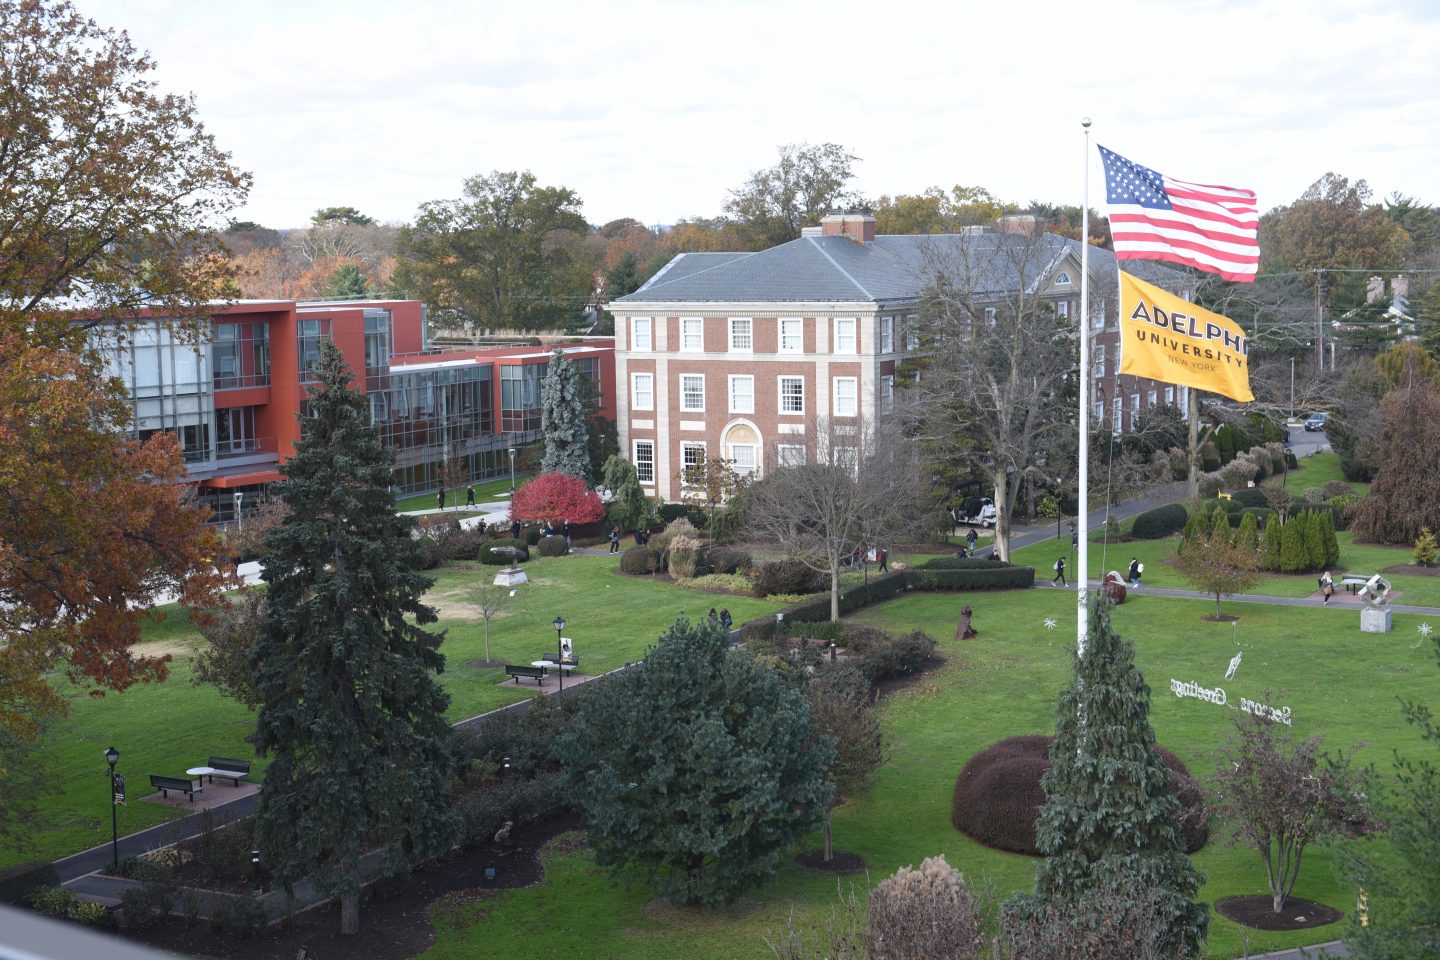 Aerial view of ӰƬ University, Garden City campus - Showing Nexus Building, Levermore Hall and the Flagpole lawn with both American and ӰƬ flags waving.